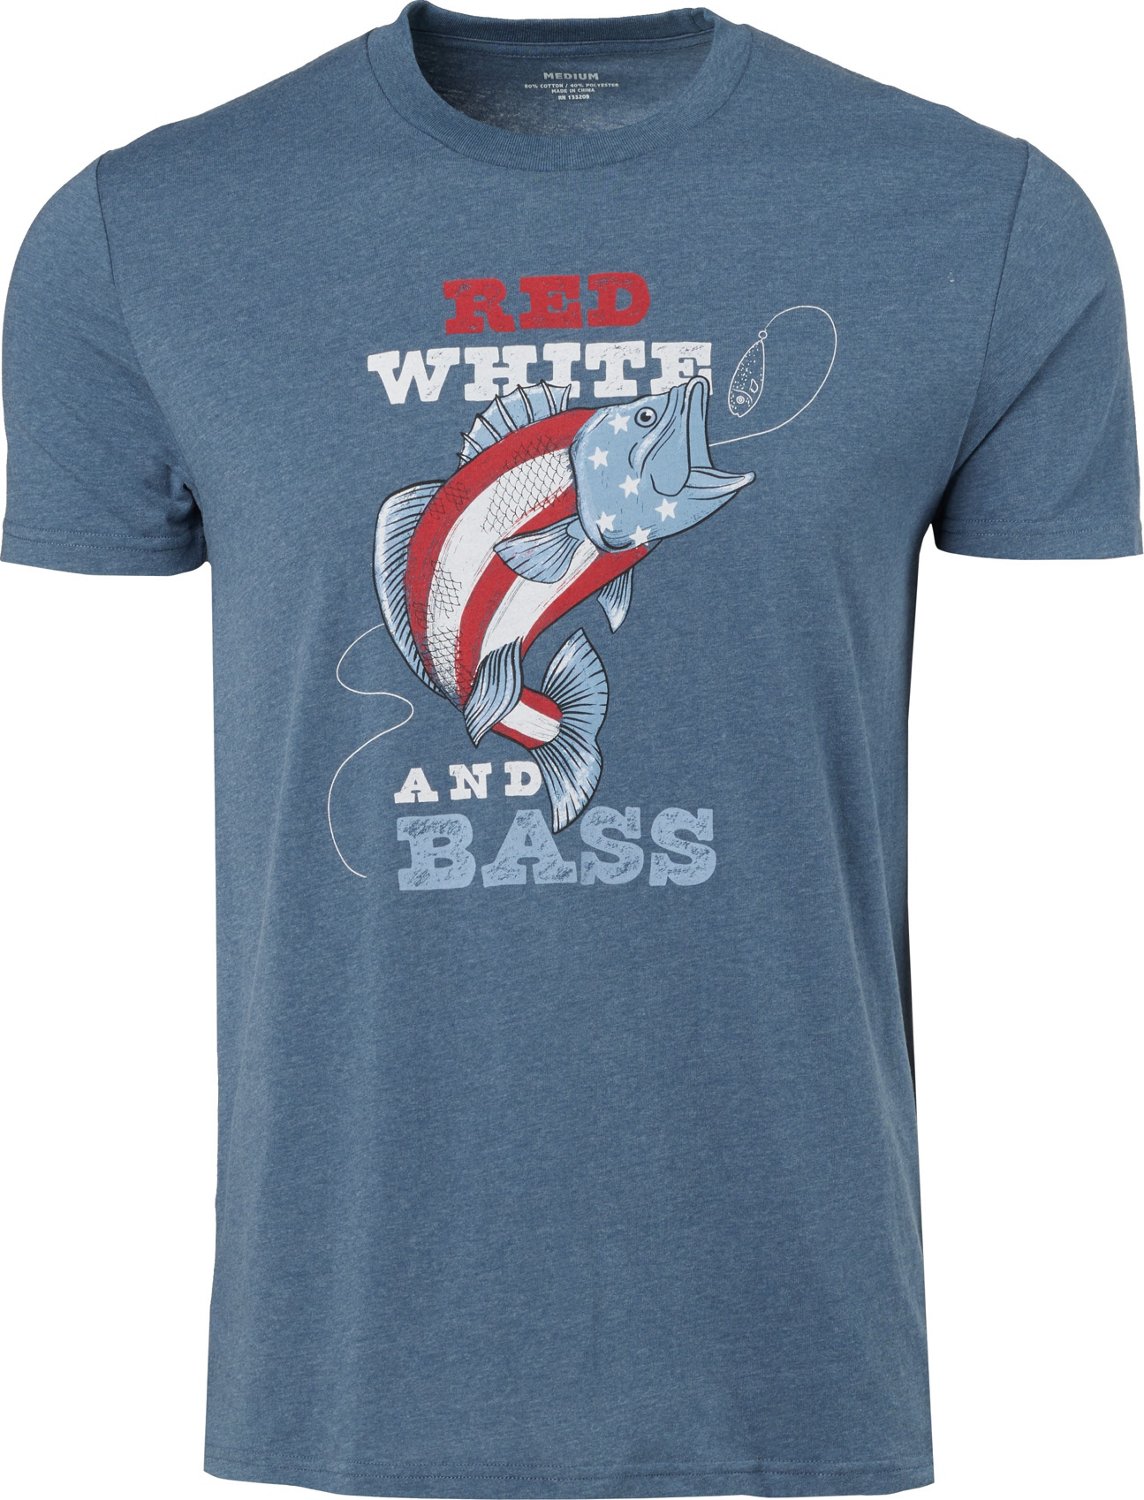 Academy Sports + Outdoors Men's Americana Red White and Bass T